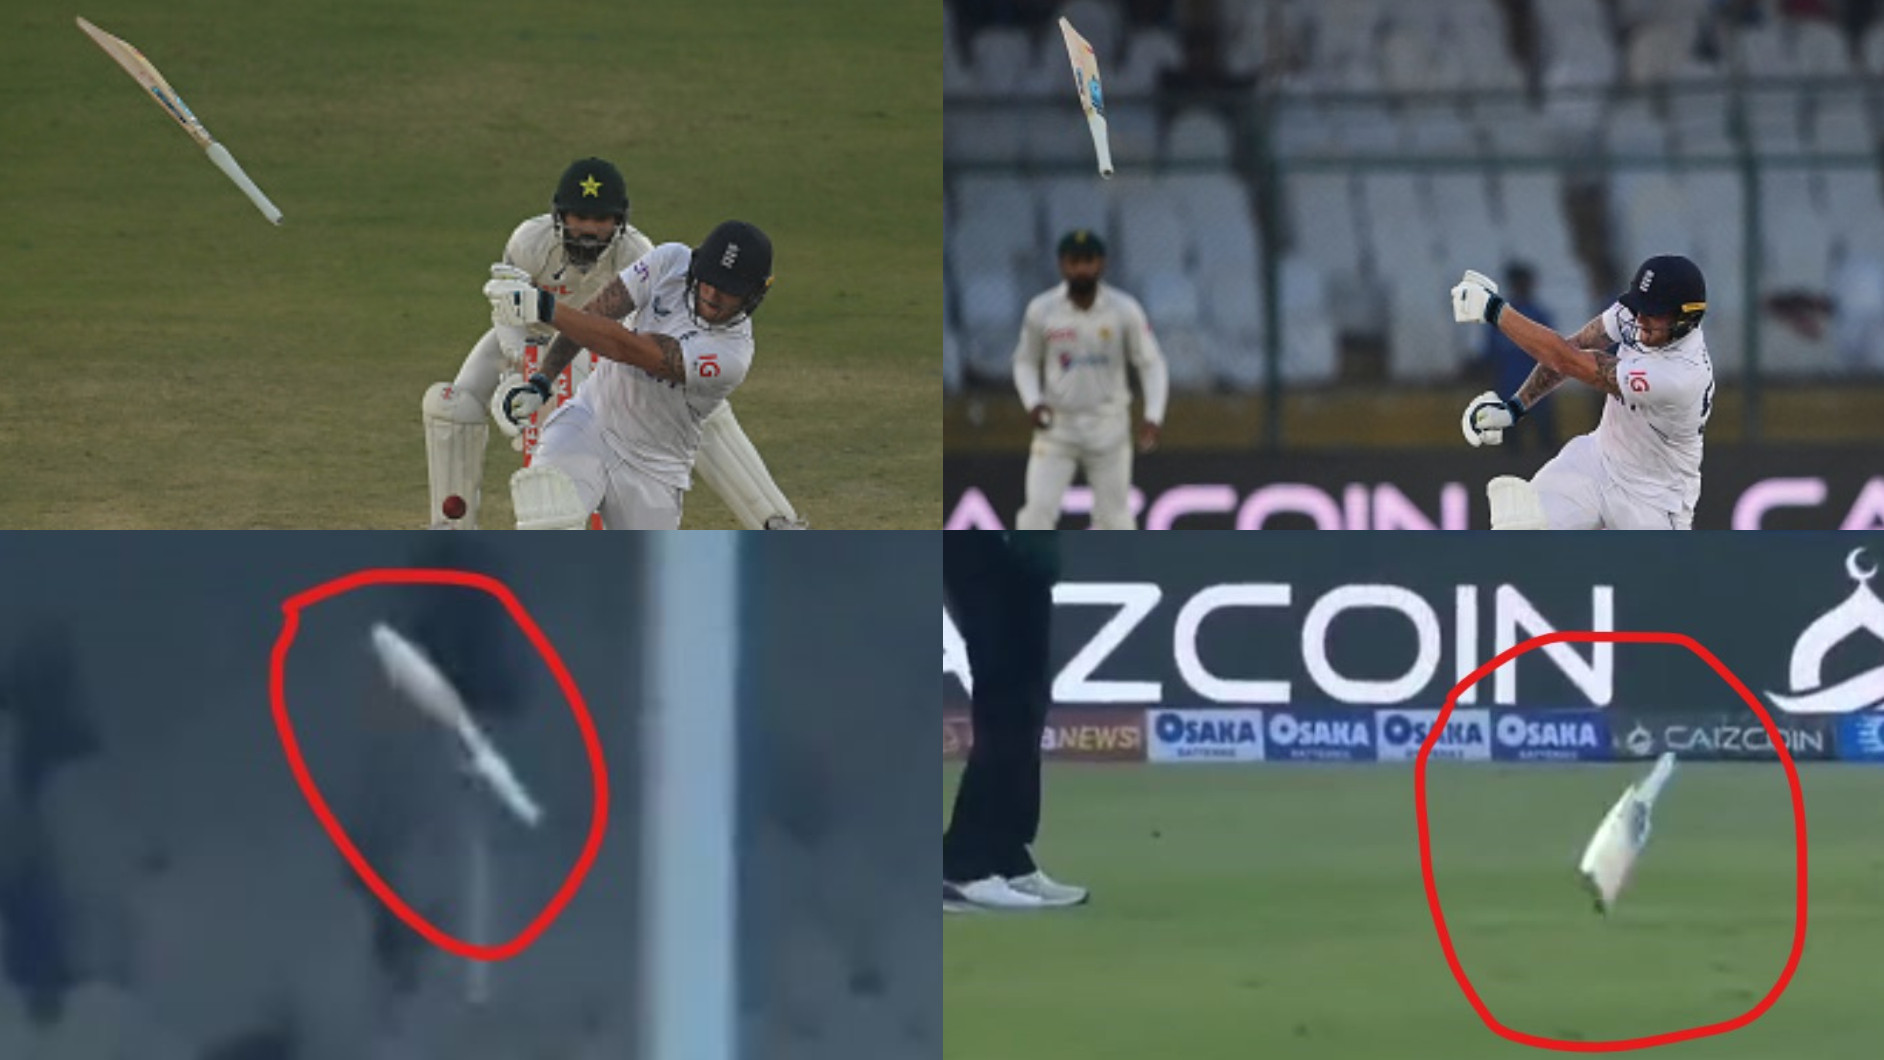 PAK v ENG 2022: WATCH- Ben Stokes’ bat goes flying trying to hit a six; Twitterverse reacts hilariously